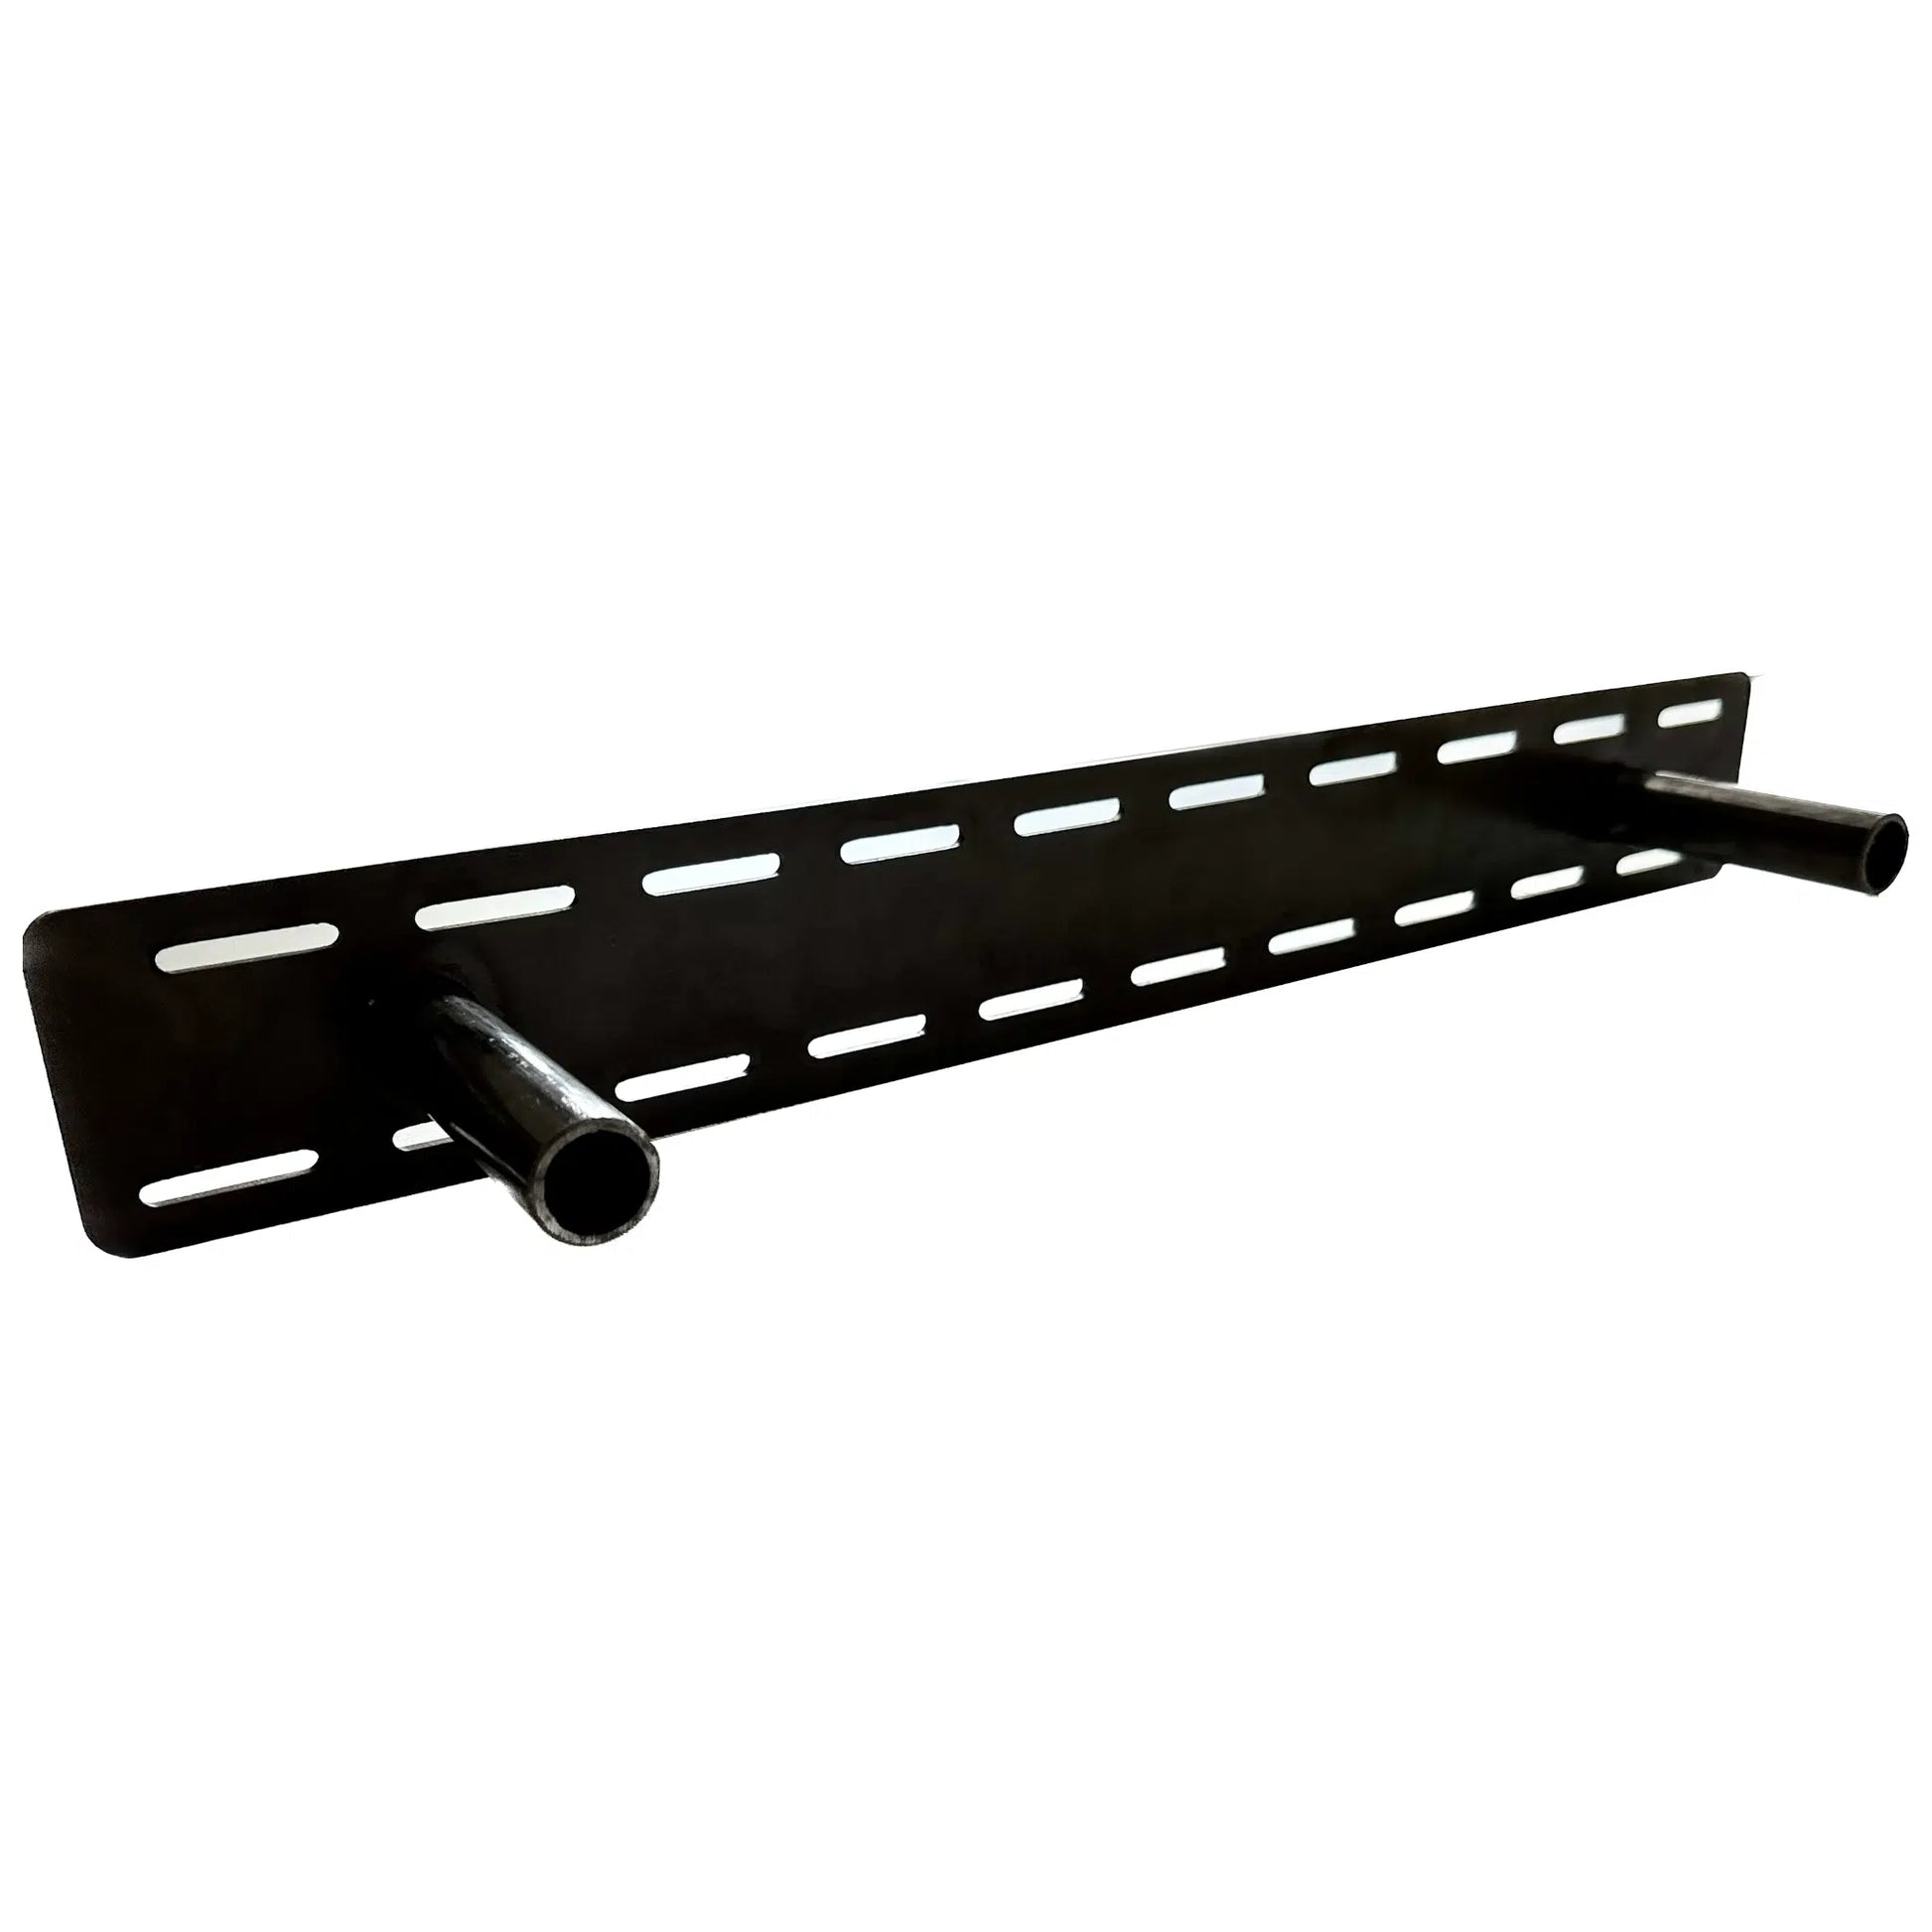 steel floating bracket with a plate on the back and slots for screws around perimeter of plate. Two rods extend out from plate that will go into mantel or shelf for mounting.